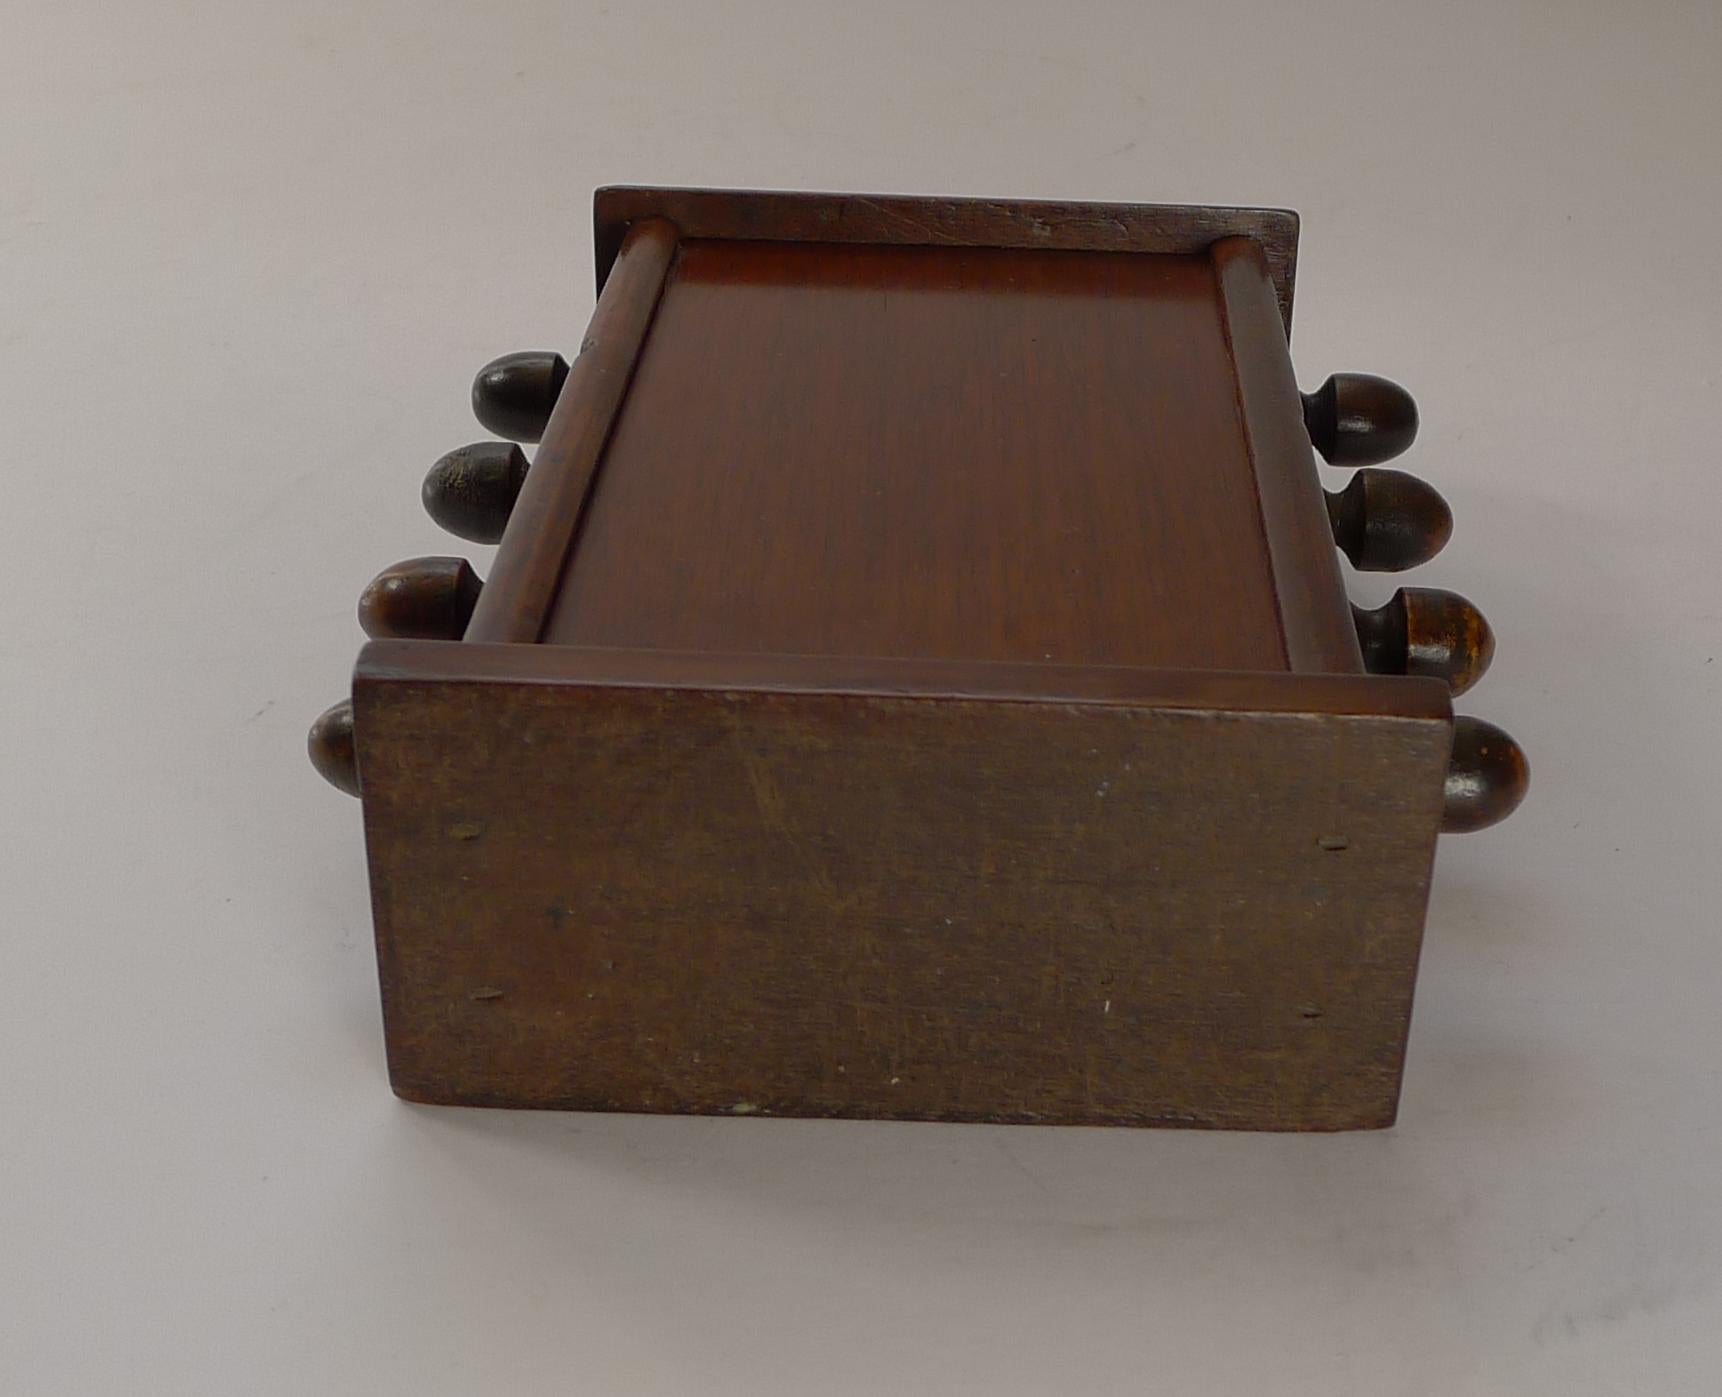 Early 20th Century Small Wooden Desk-top Perpetual Calendar, c.1910